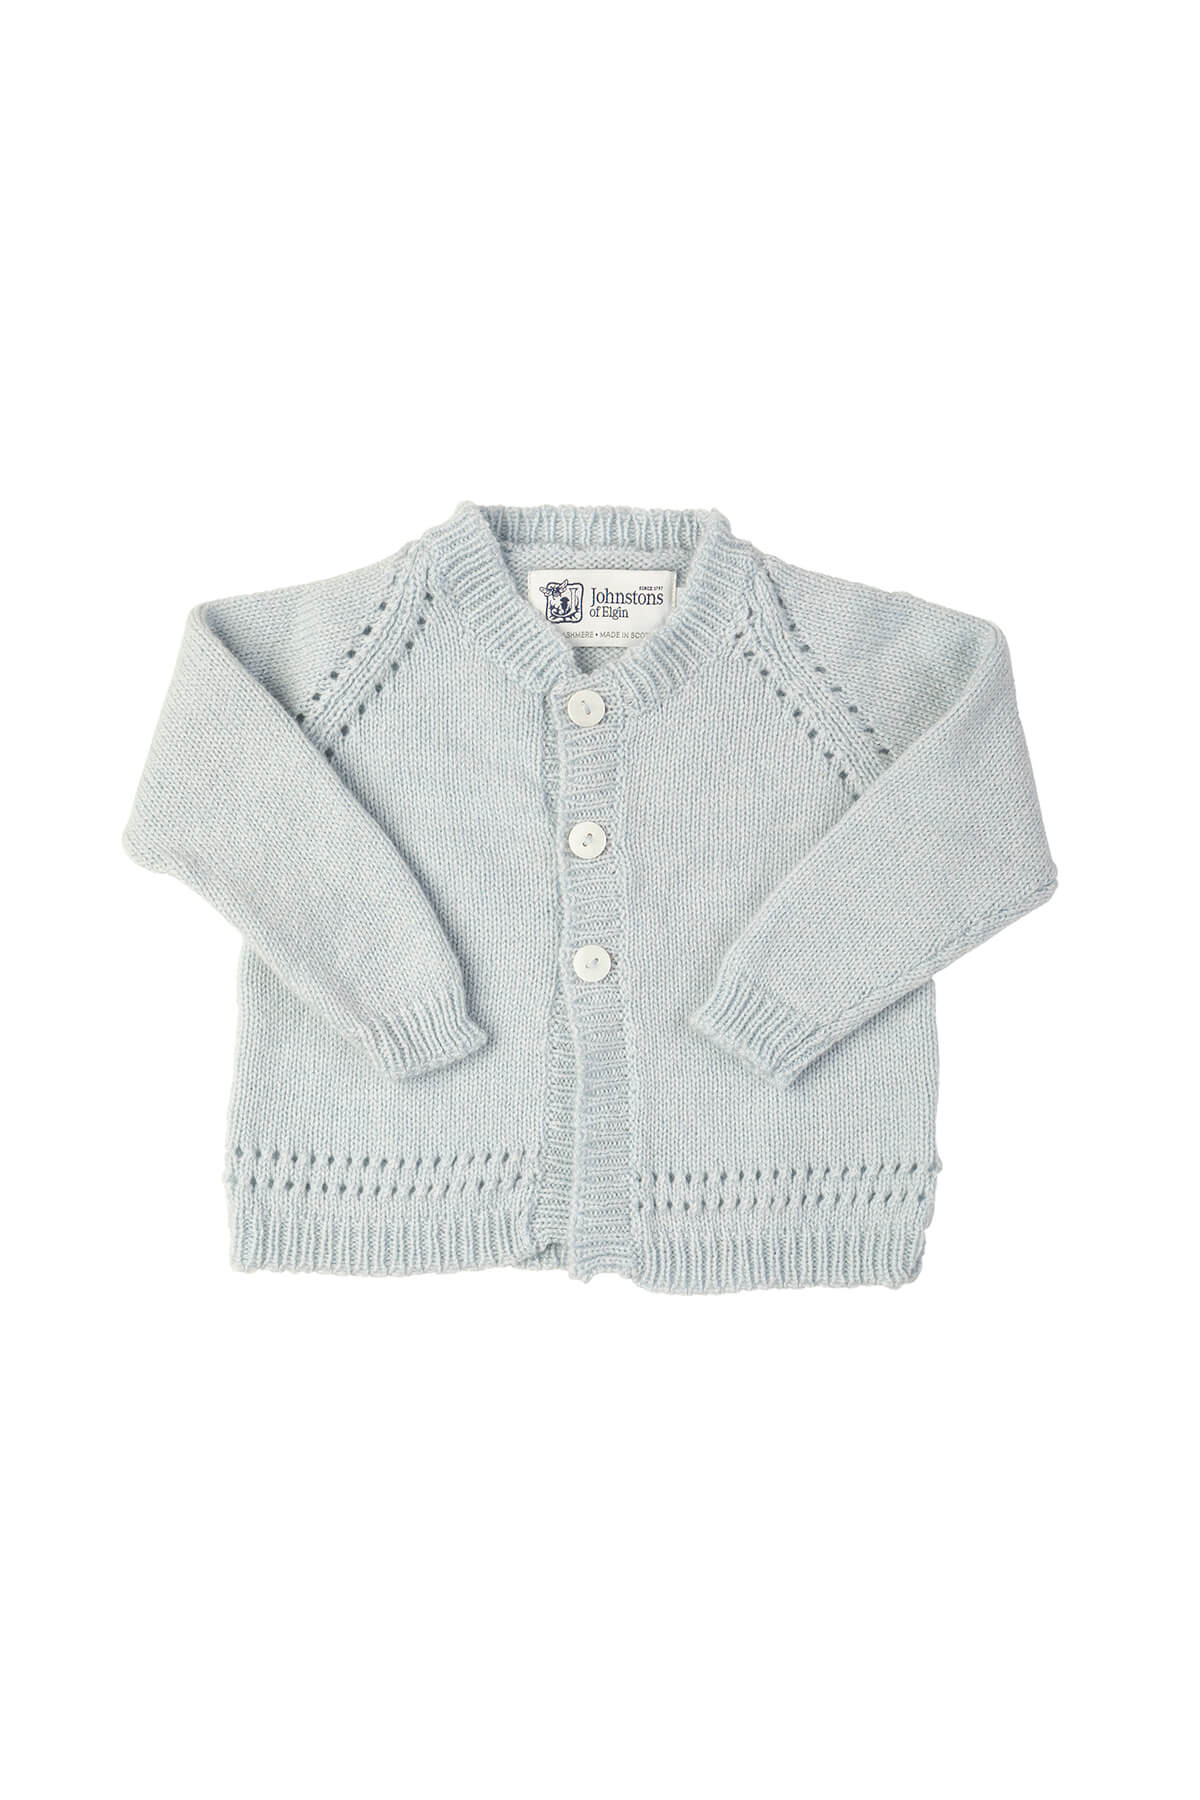 Johnstons of Elgin Hand Knitted Cashmere Baby Cardigan in Powder Blue on a white background 301932809